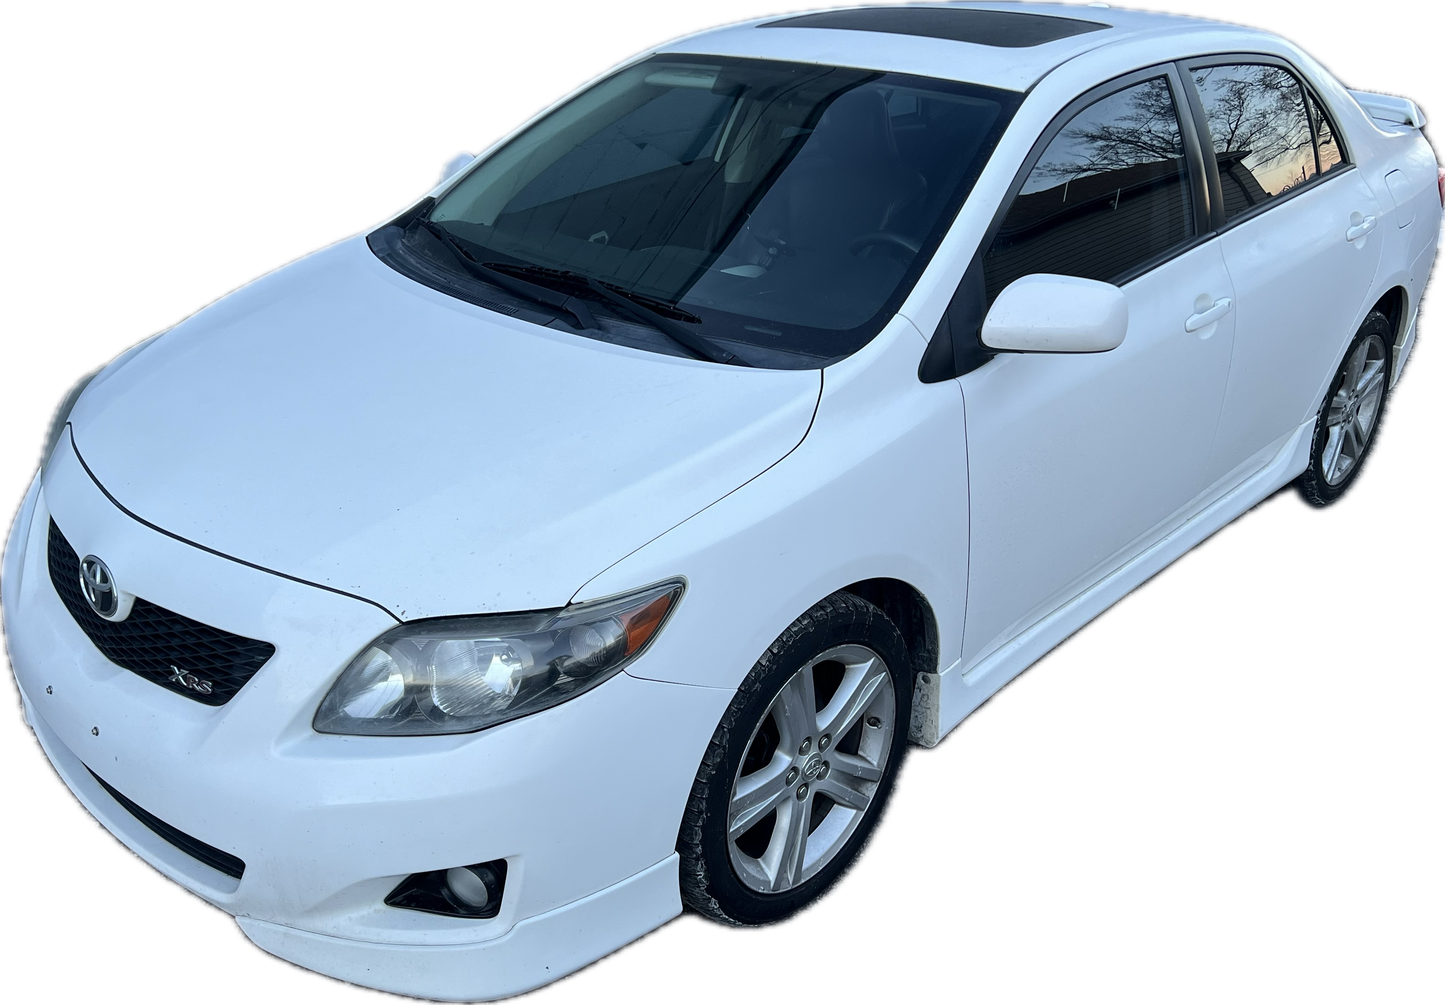 2010 Toyota Corolla XRS -Manual Leather Fully Loaded -Warranty! (New Arrival)